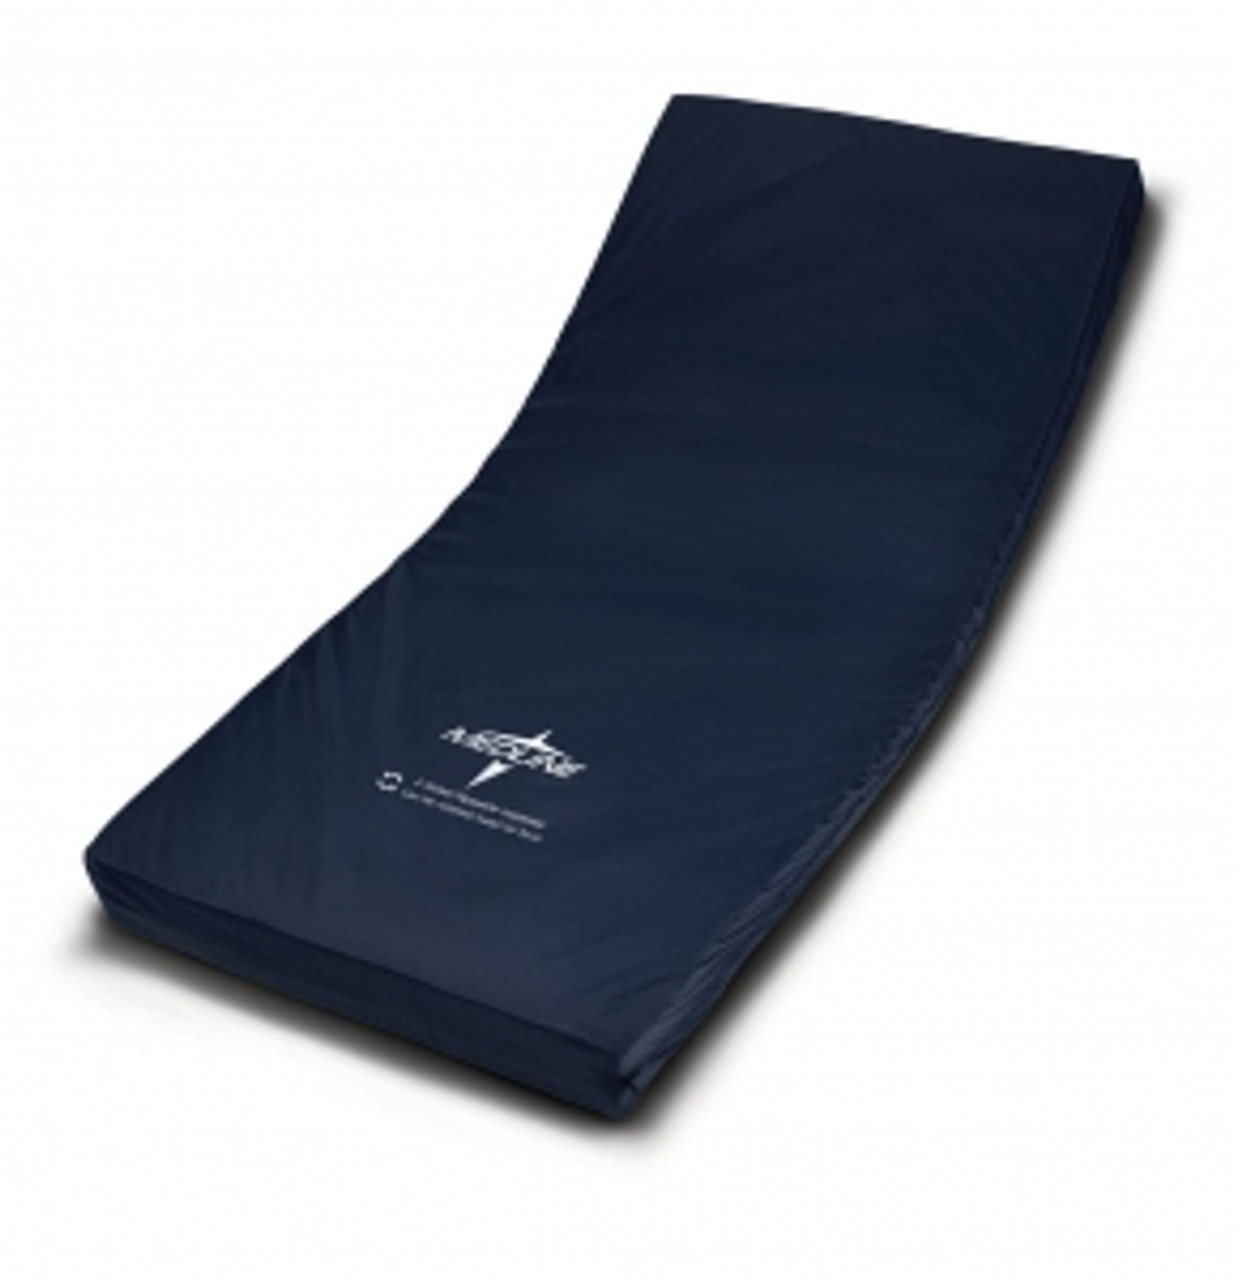 Comfortable high-density all-foam mattress provides effective pressure injury prevention and offers a therapeutic alternative to traditional home care innerspring mattresses
Nylon cover helps reduce shear and friction
Two-sided mattress can be flipped and rotated head to foot
Easy to store, carry, deliver and set up; just takes one person to open the box set up the mattress